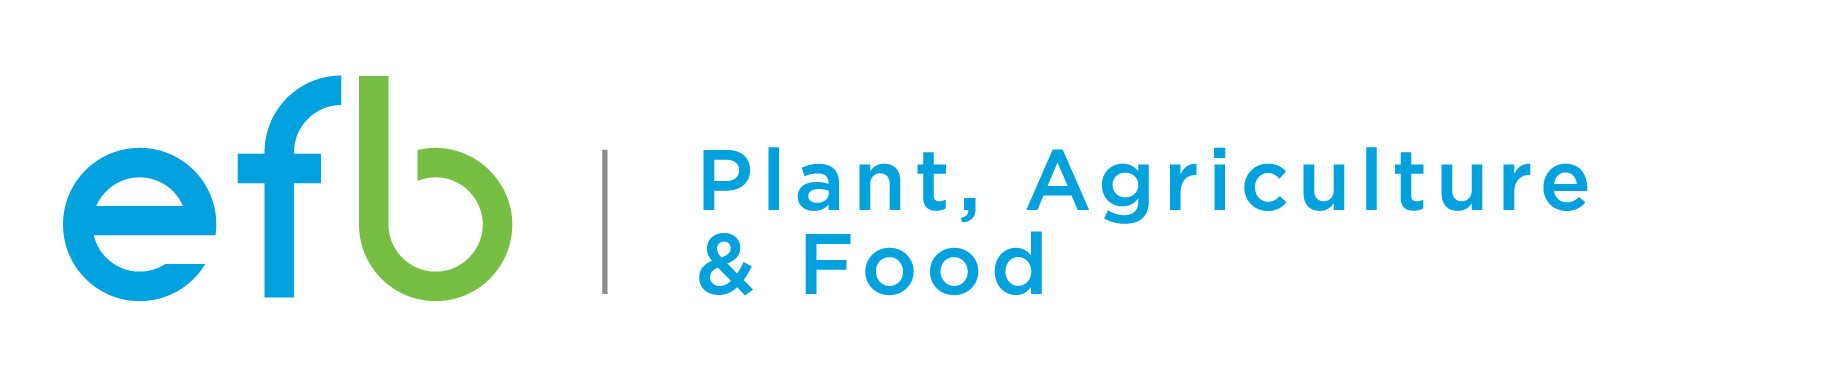 EFB Plant, Agriculture & Food Division